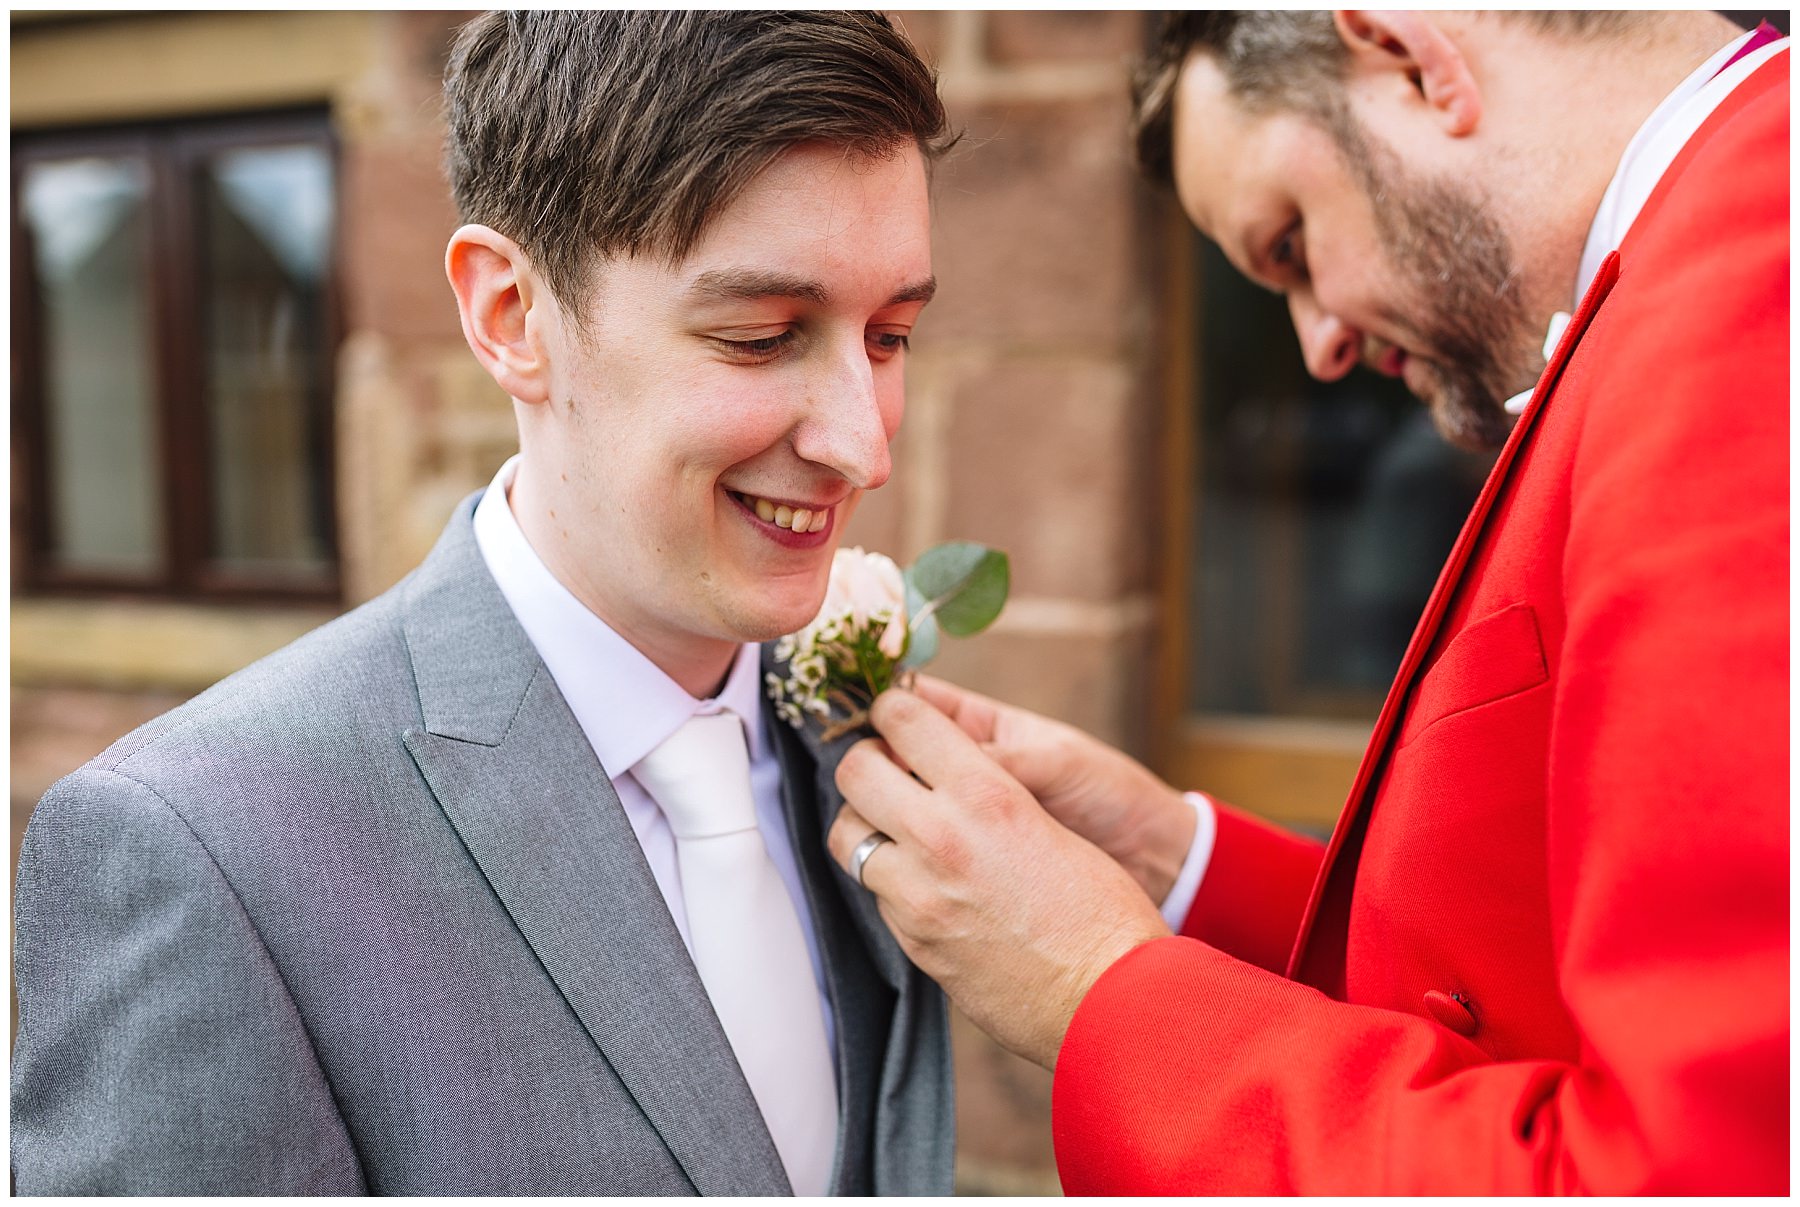 Toastmaster assists with grooms buttonhole